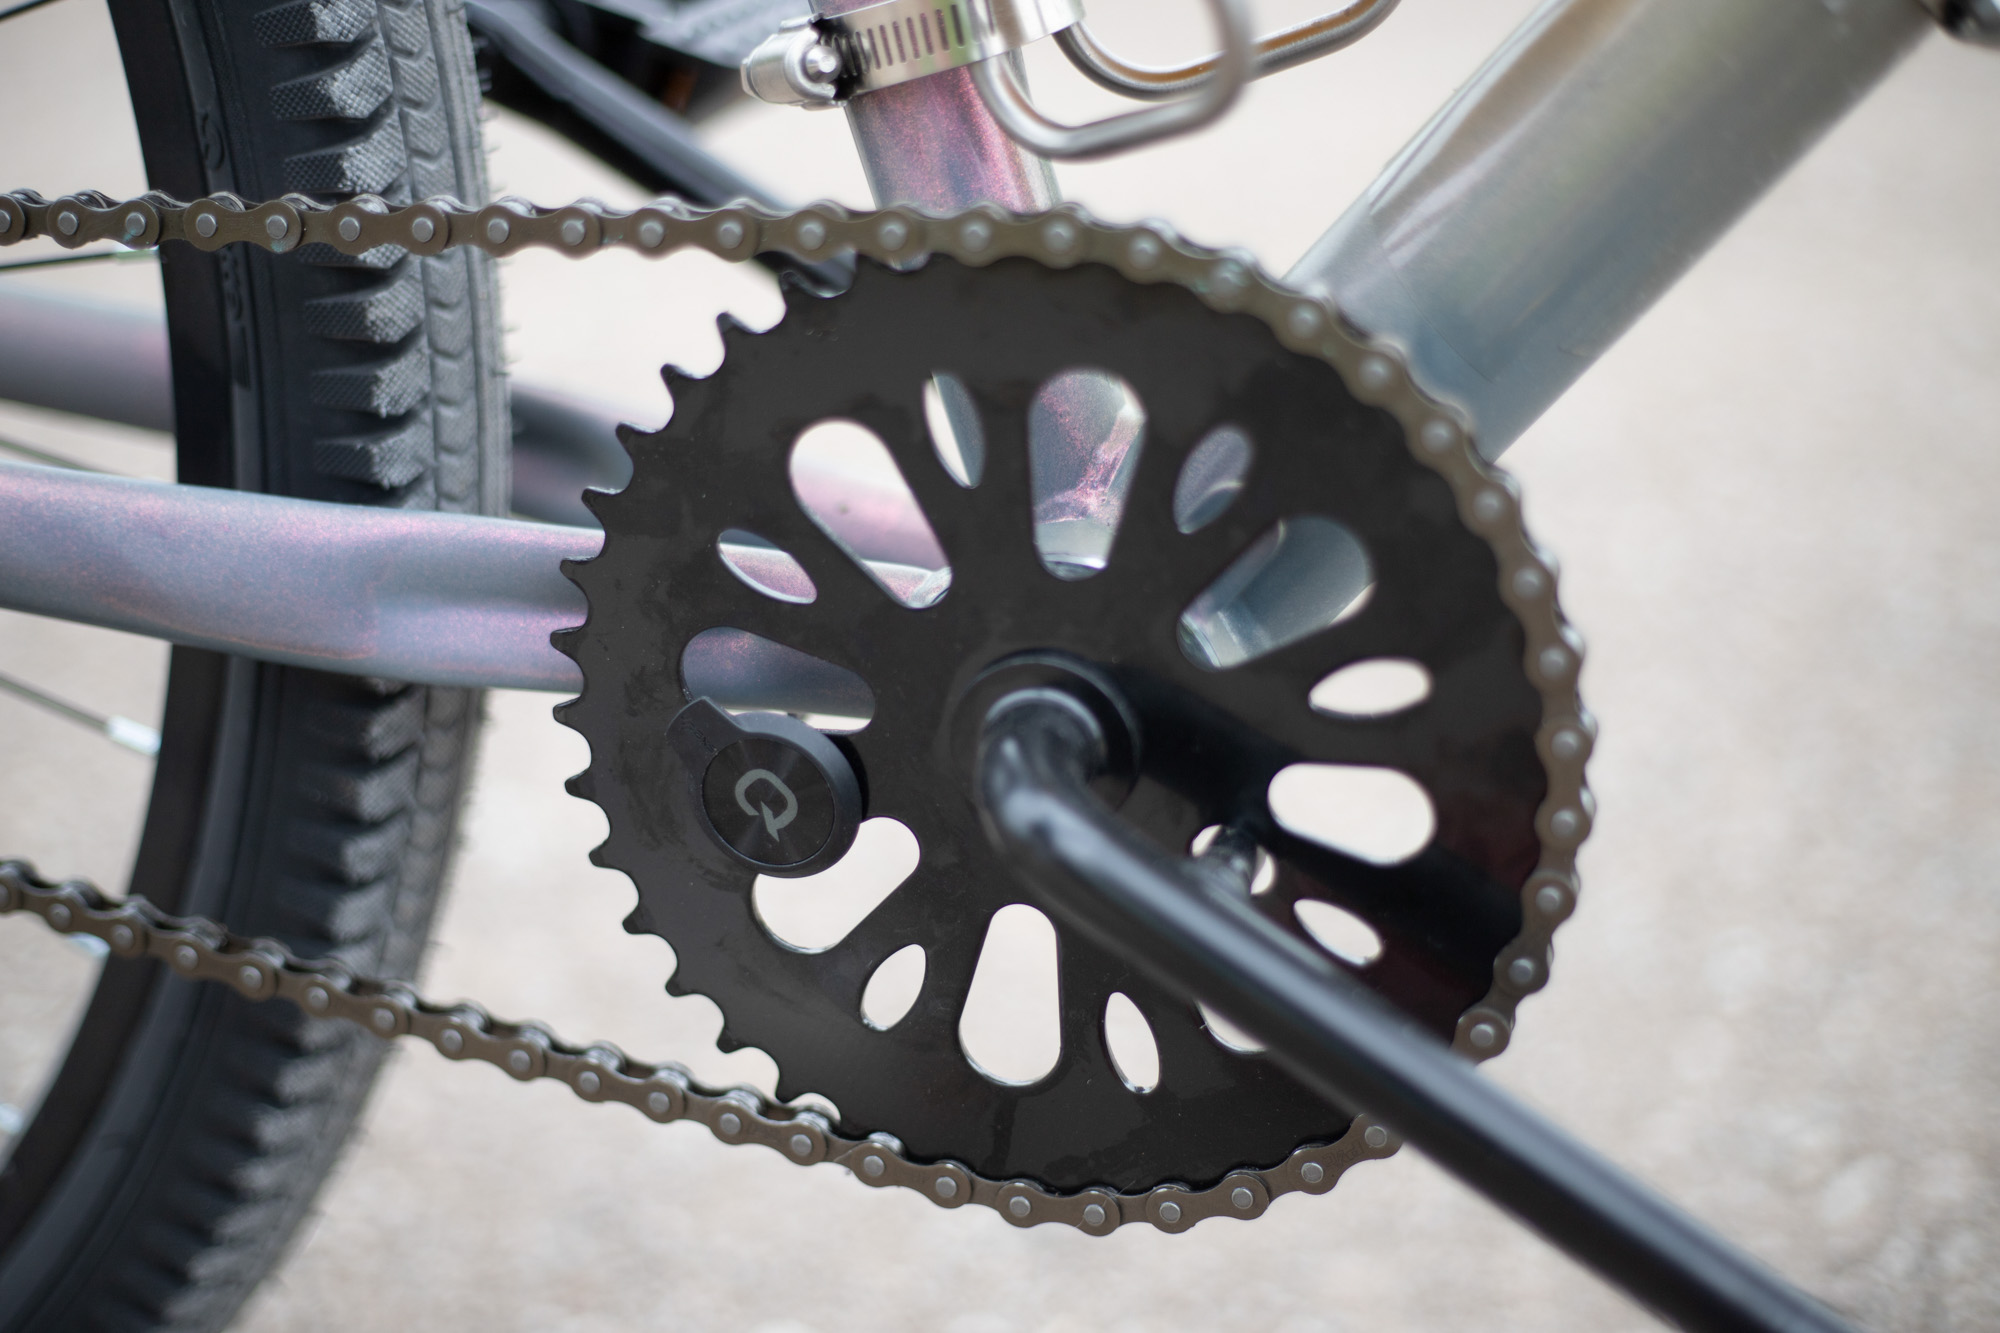 A Quarq power meter cover is glued to a steel crankset.